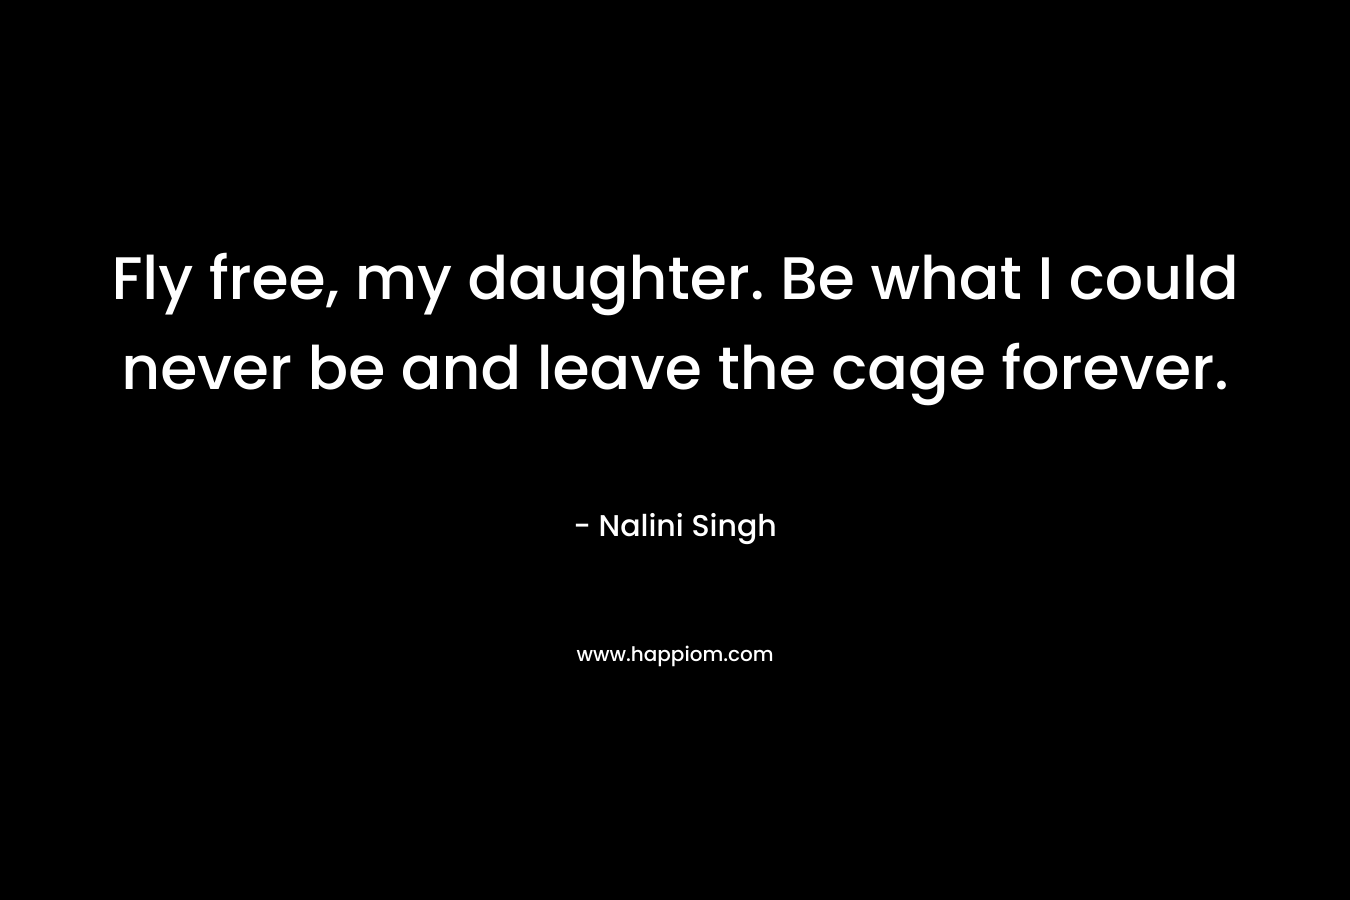 Fly free, my daughter. Be what I could never be and leave the cage forever. – Nalini Singh